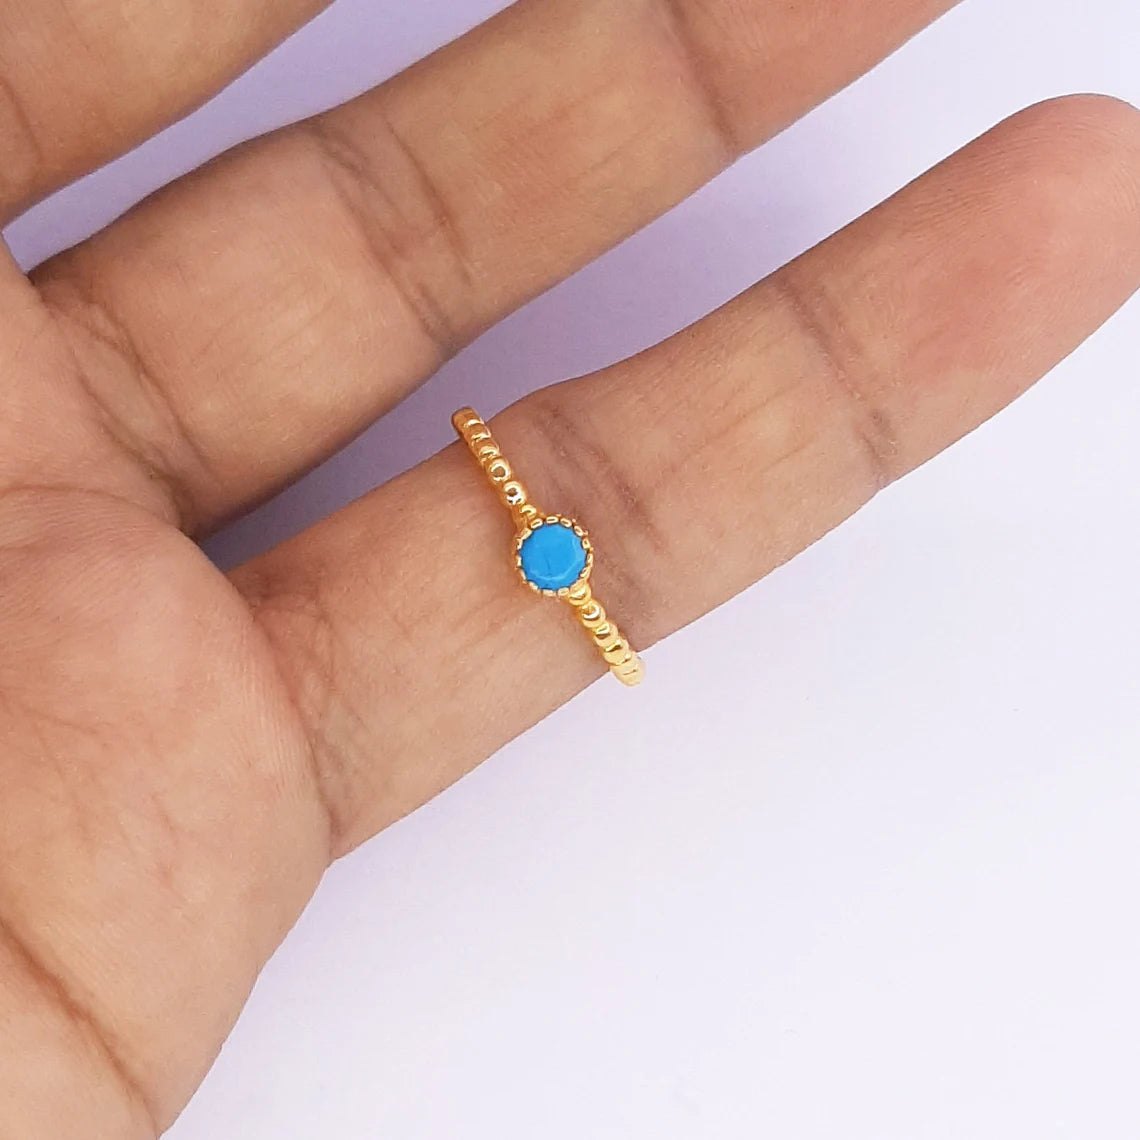 Turquoise Ring - Round Turquoise Ring - December Birthstone